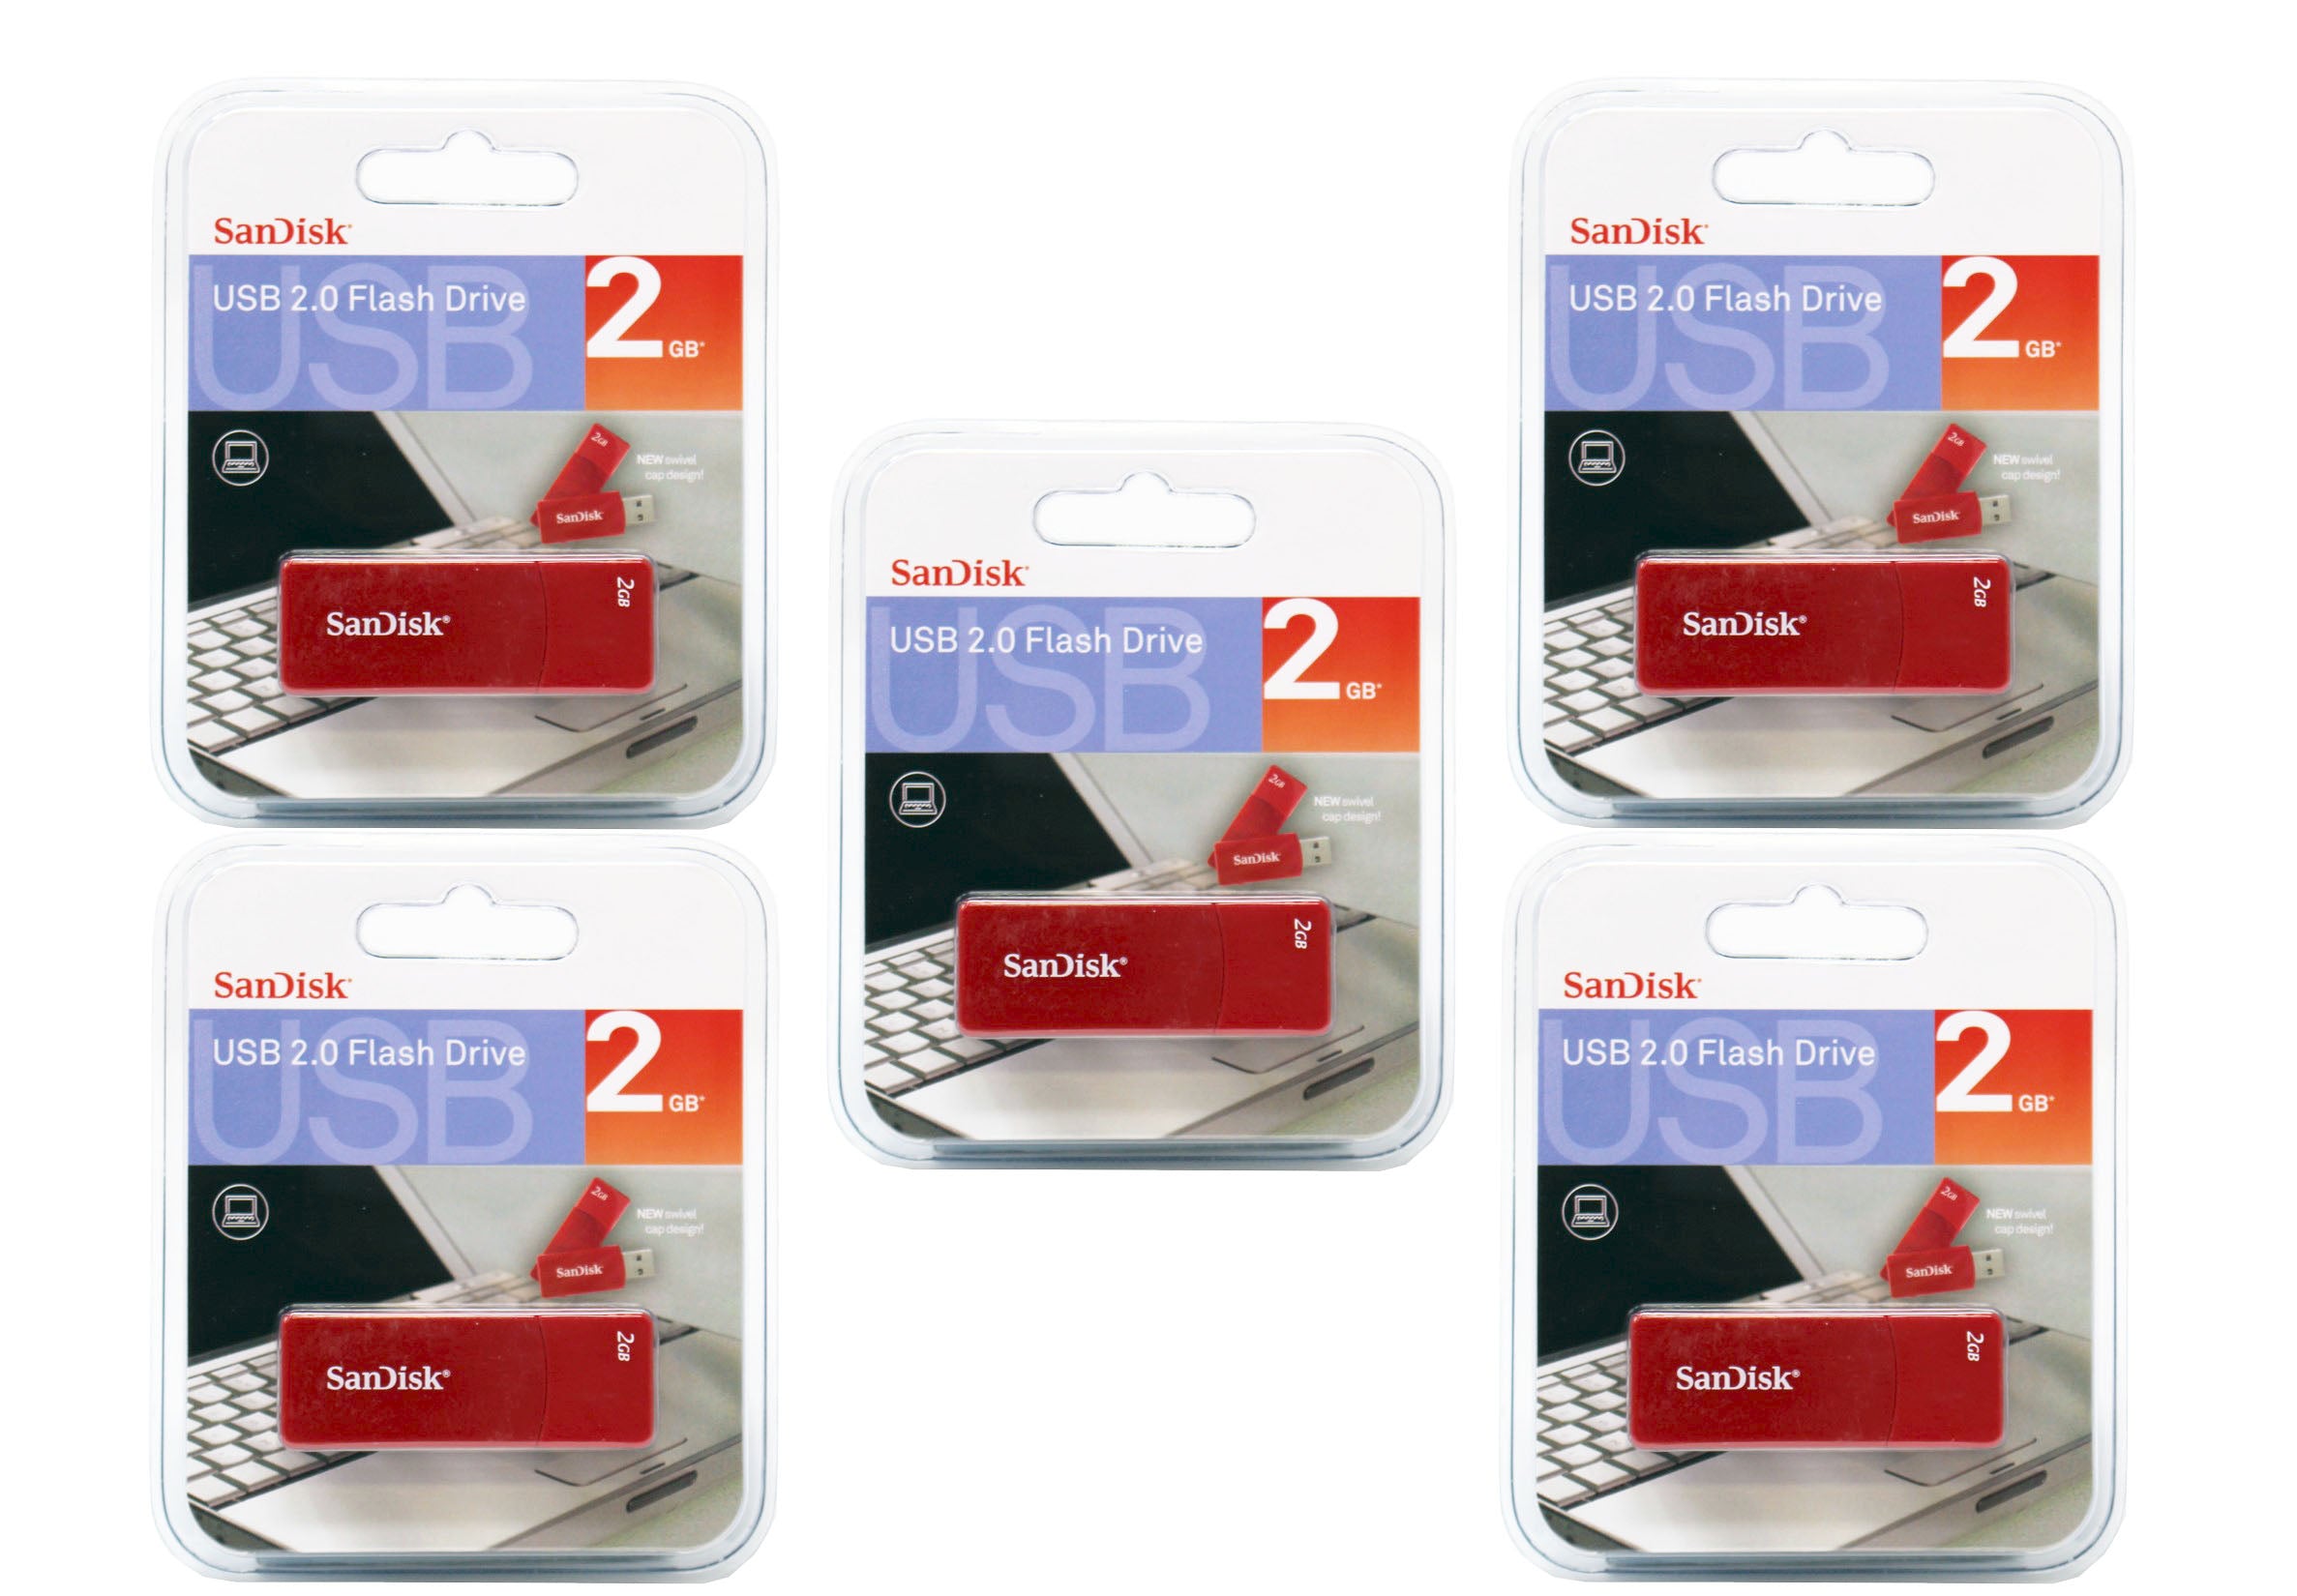 SanDisk CZ20 2GB USB 2.0 Flash Drive - SDCZ20-2048-P36 (Pack of Five)